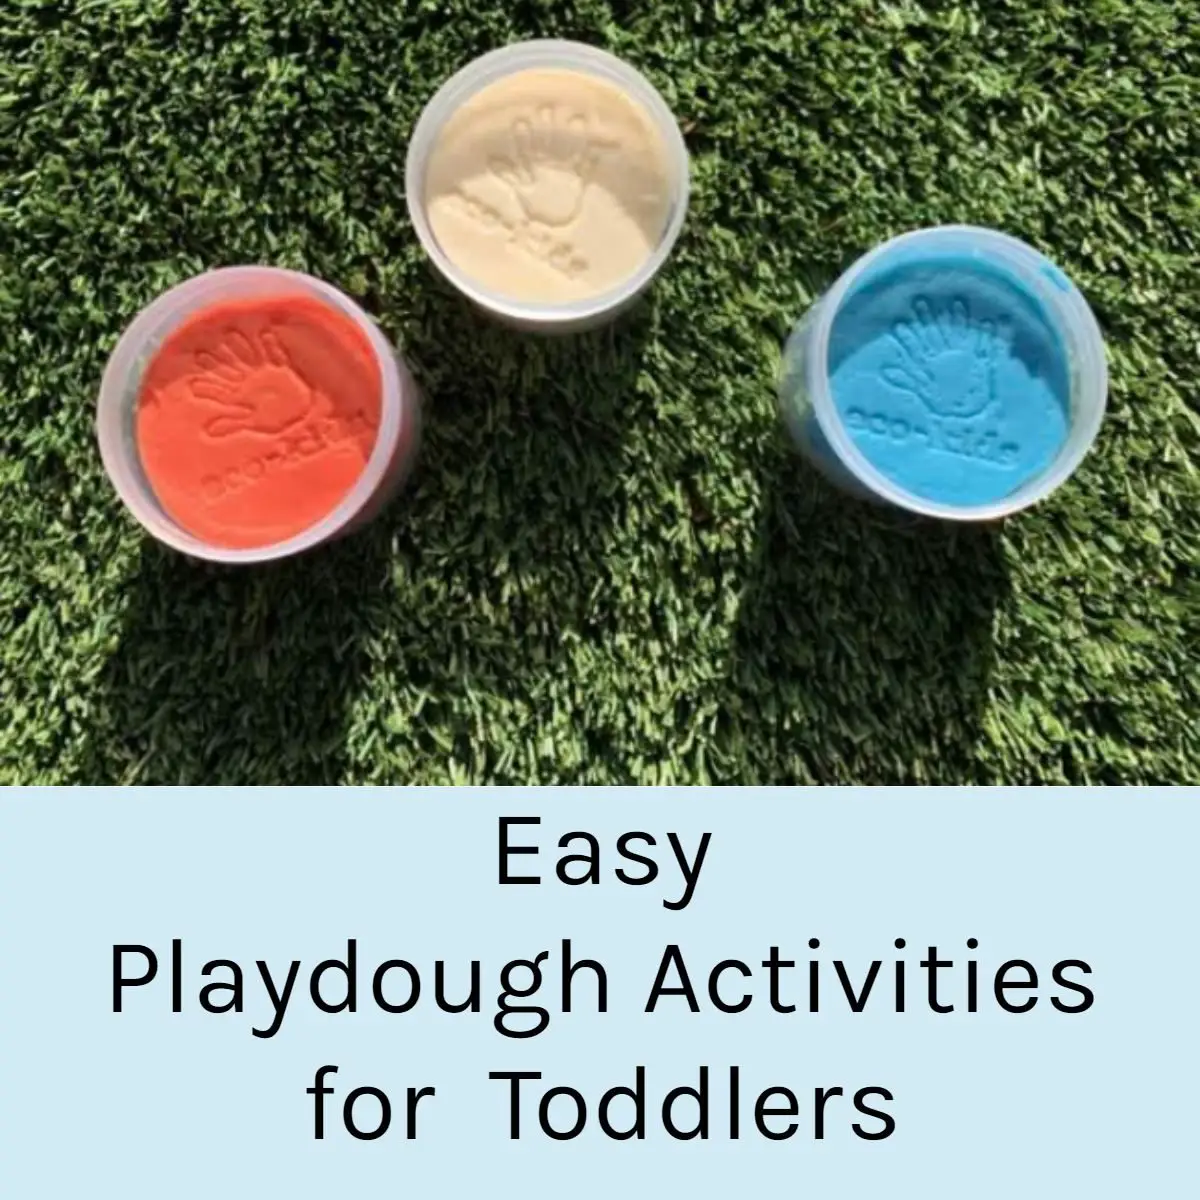 Easy Playdough Activities for Toddlers